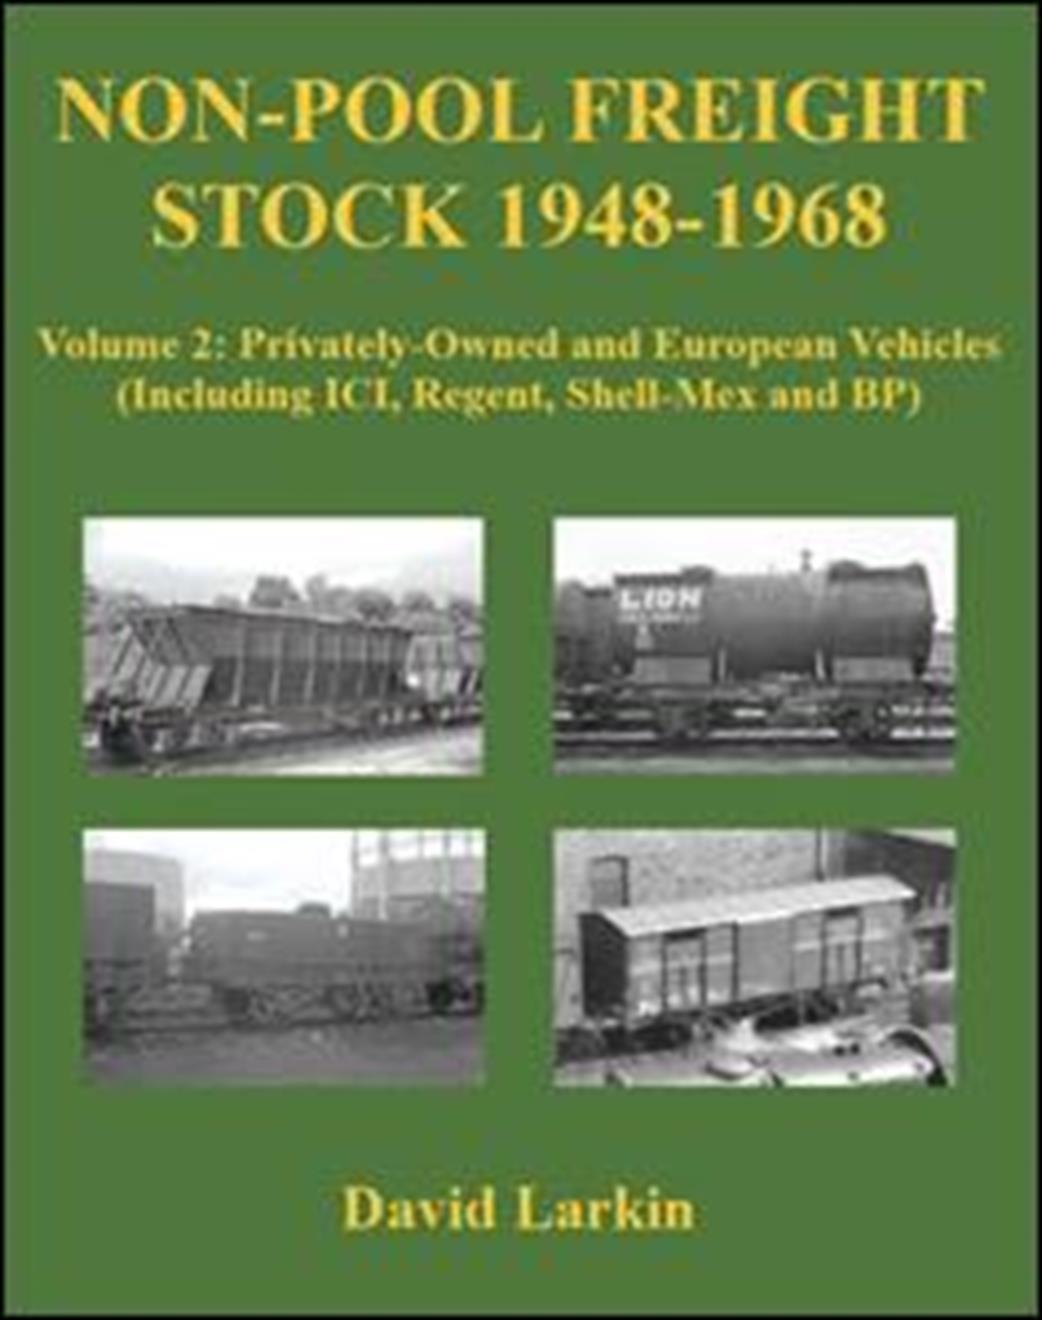 9781905505418 Non-Pool Freight Stock 1948-1968 Volume 2: Privately-Owned and European Vehicles (Including ICI, Regent, Shell-Mex and BP)